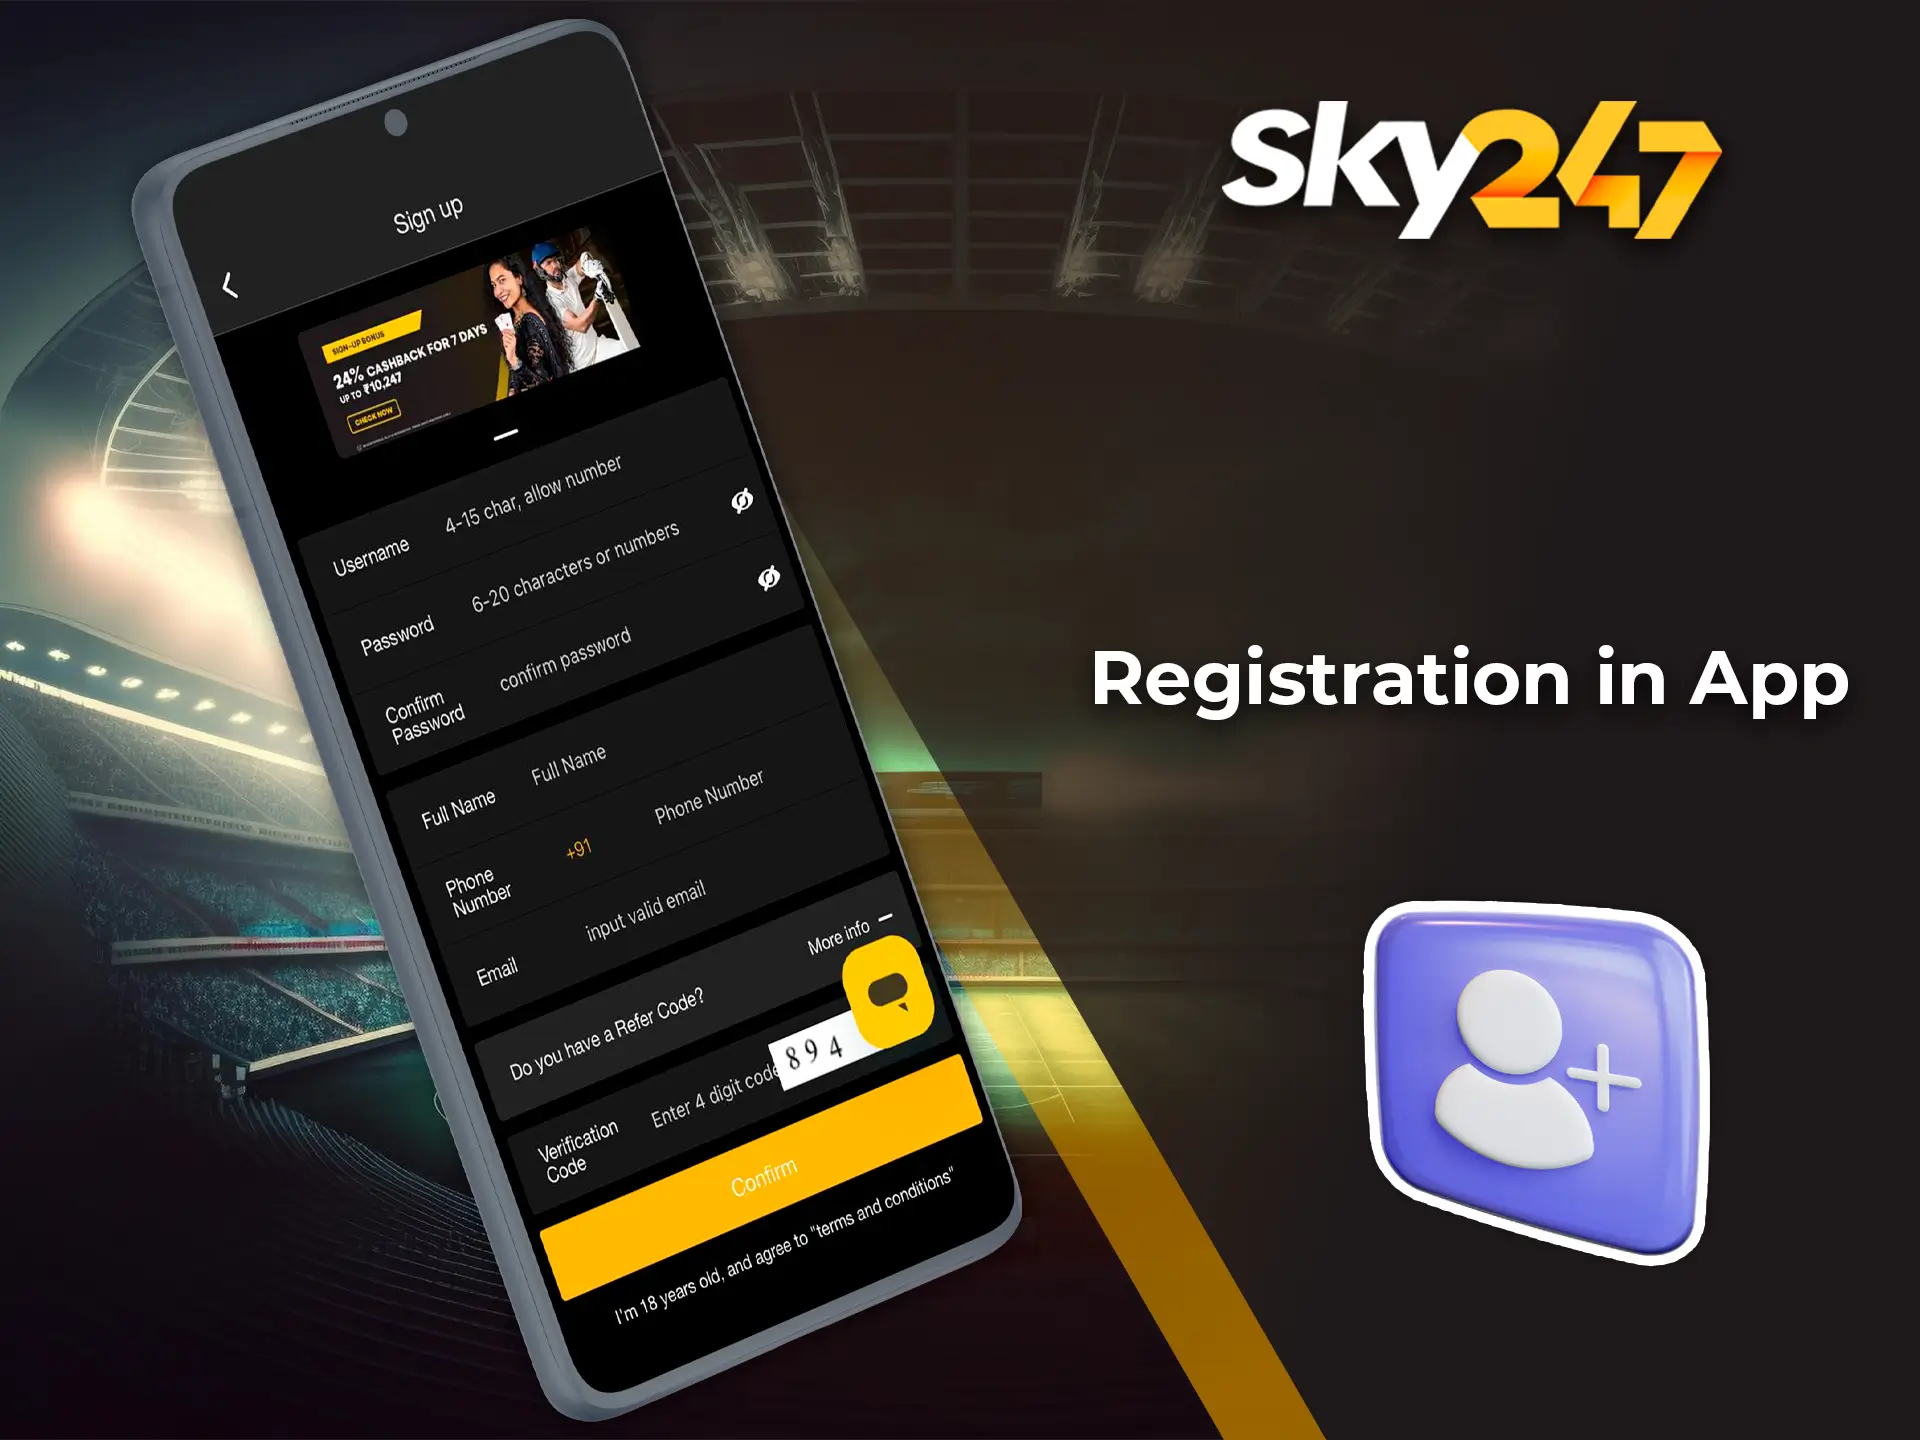 Register on the Sky247 app to get access to the first bonuses from the casino.